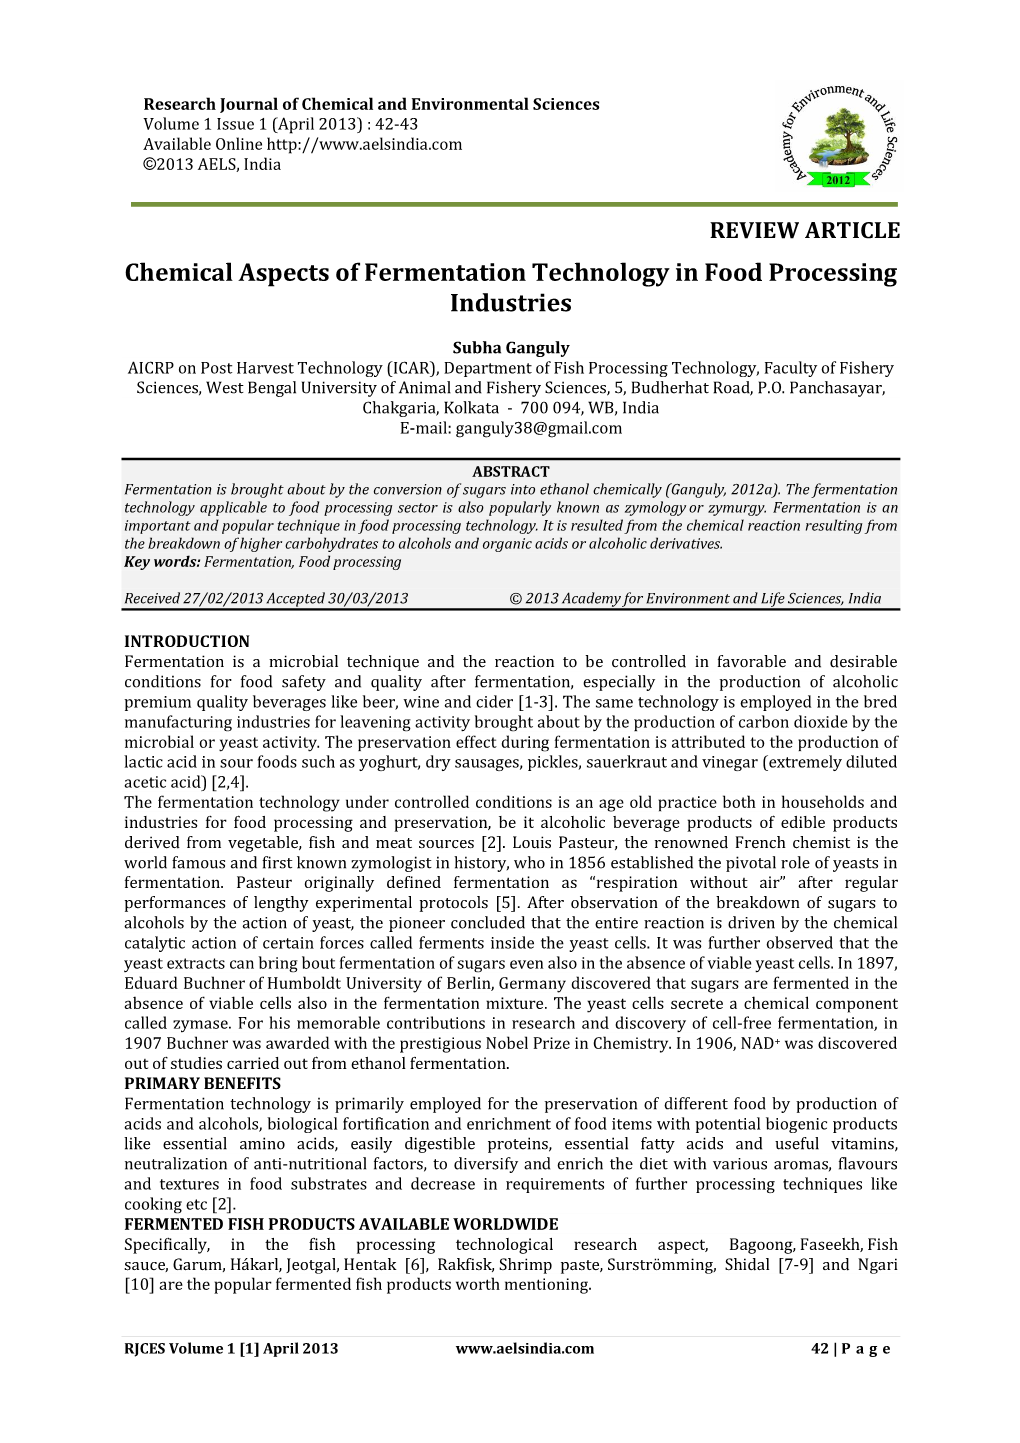 Chemical Aspects of Fermentation Technology in Food Processing Industries